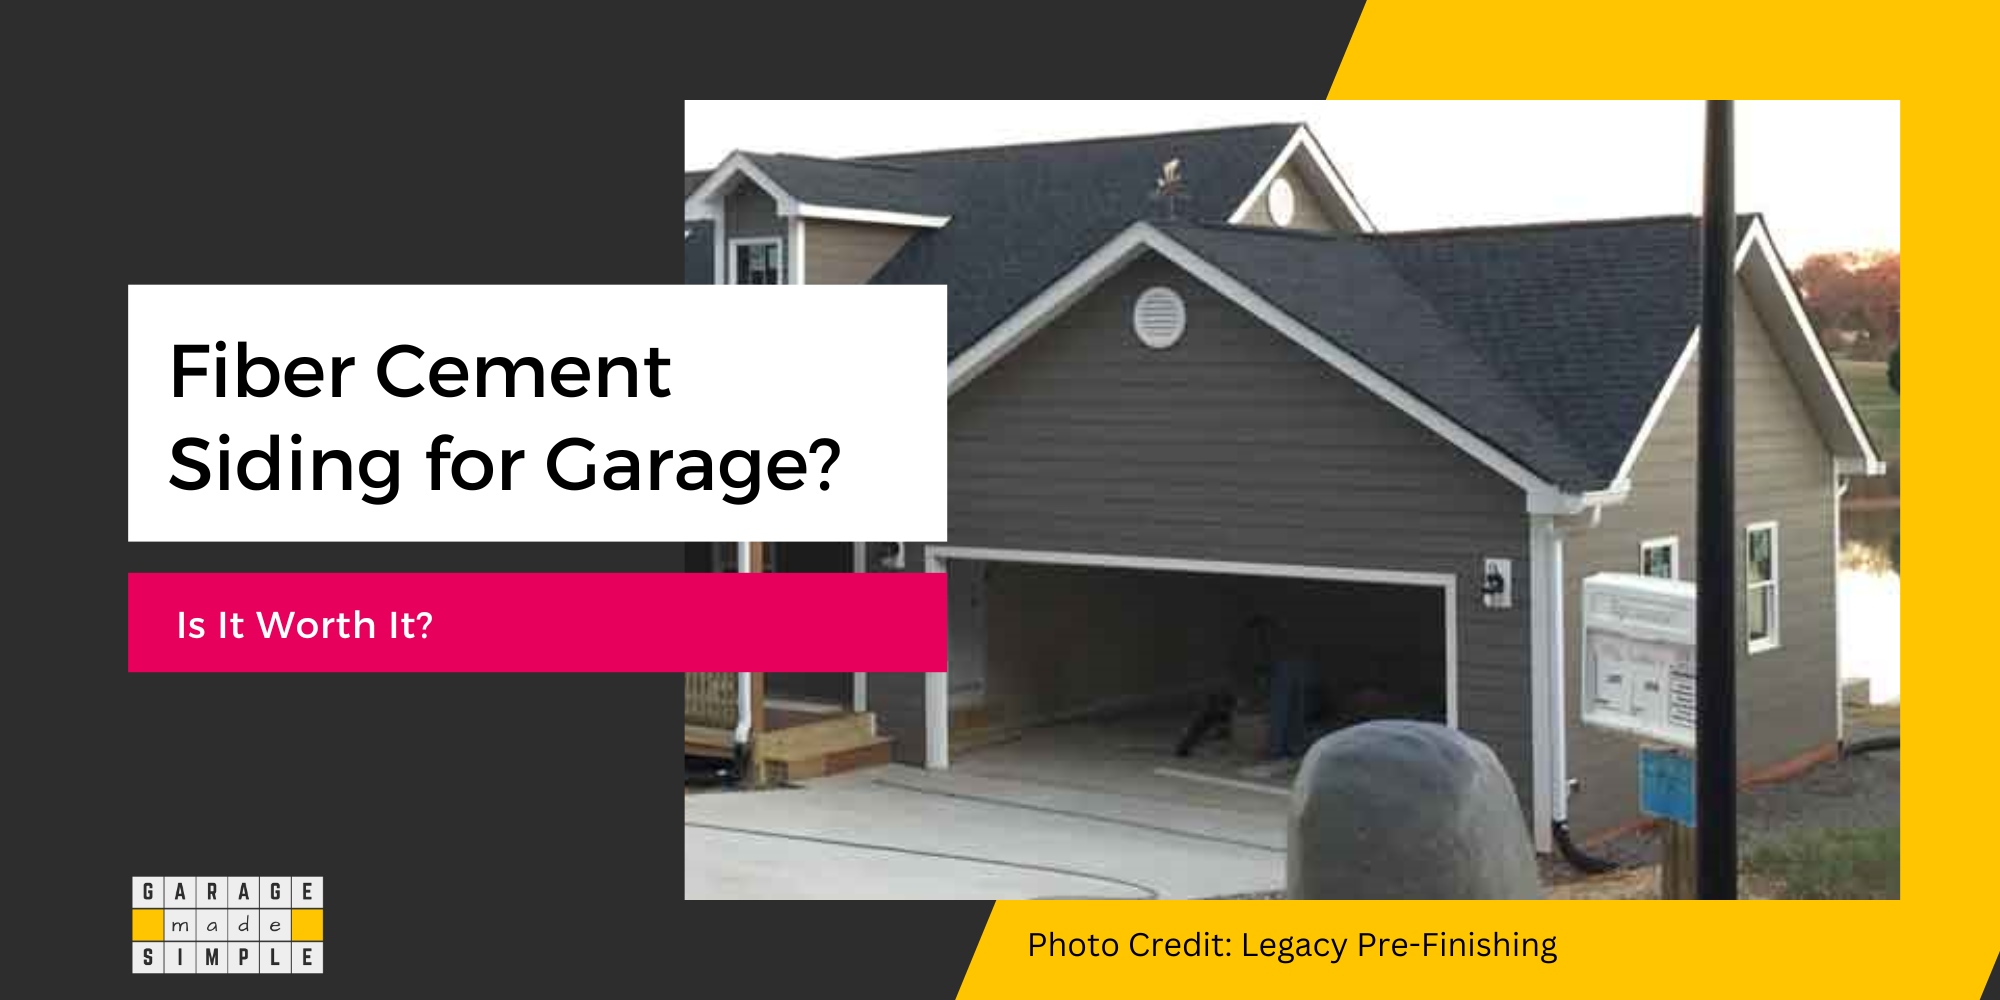 Fiber Cement Siding for Garage: Is It Worth It?